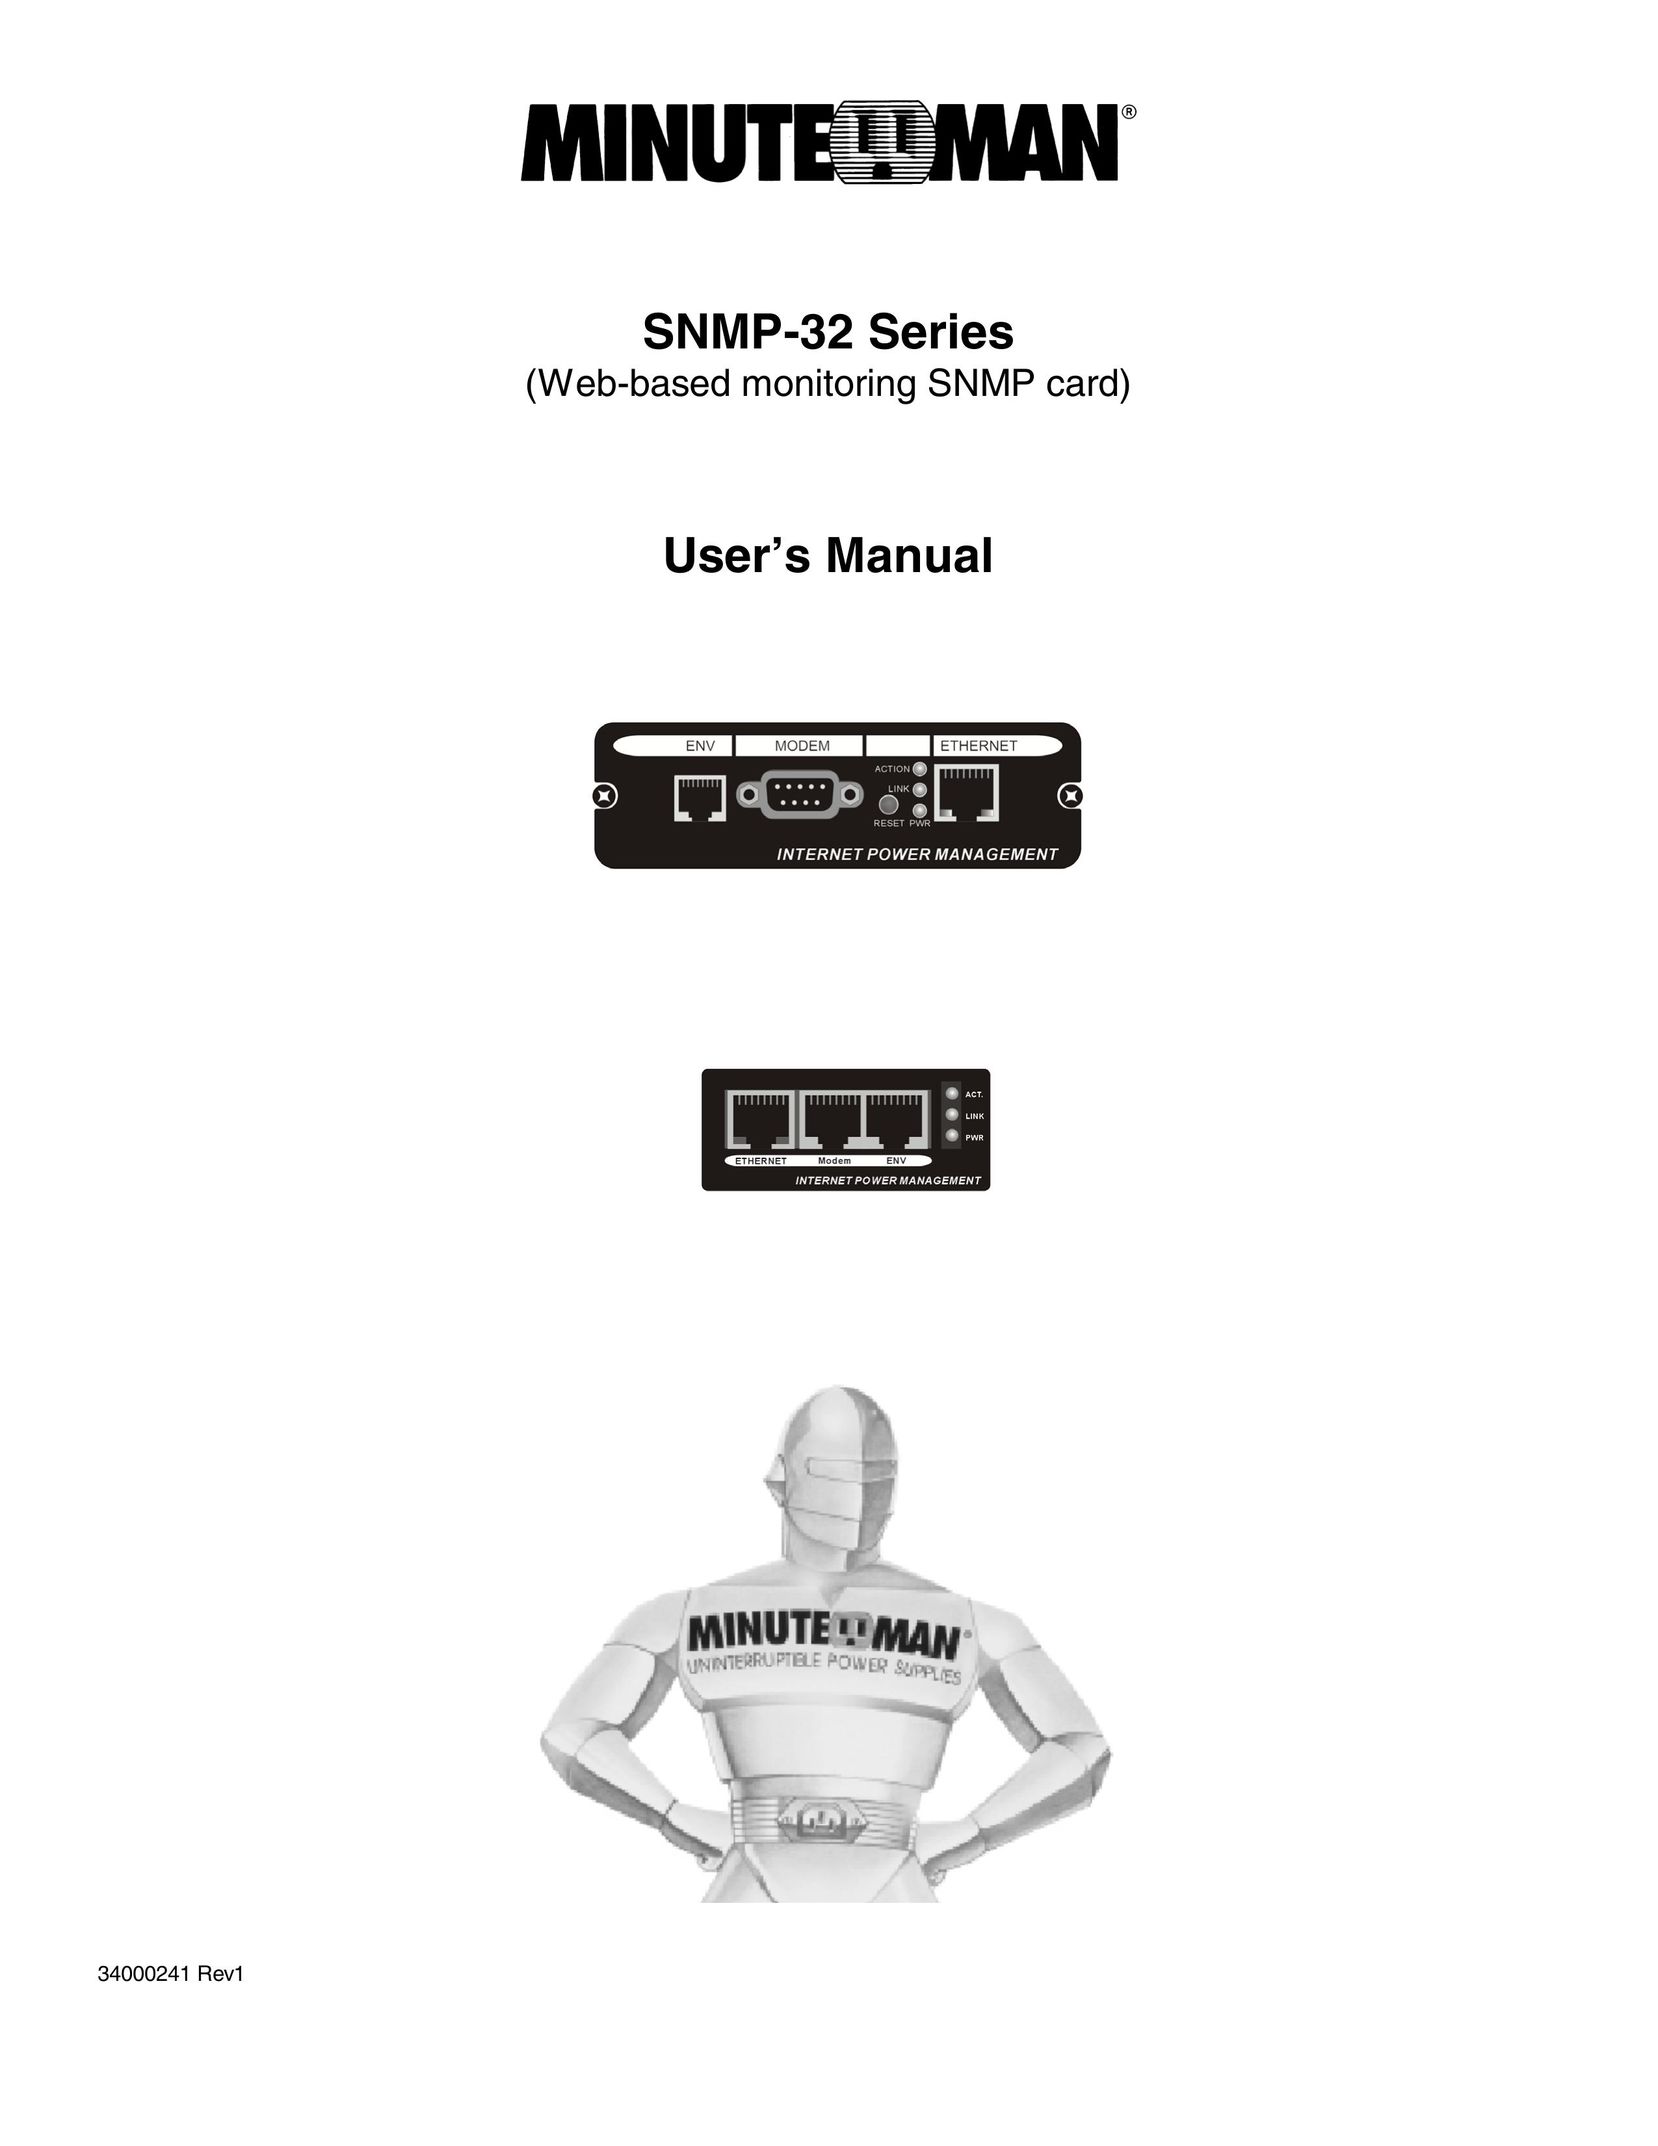 Minuteman UPS SNMP-32 Series Network Router User Manual